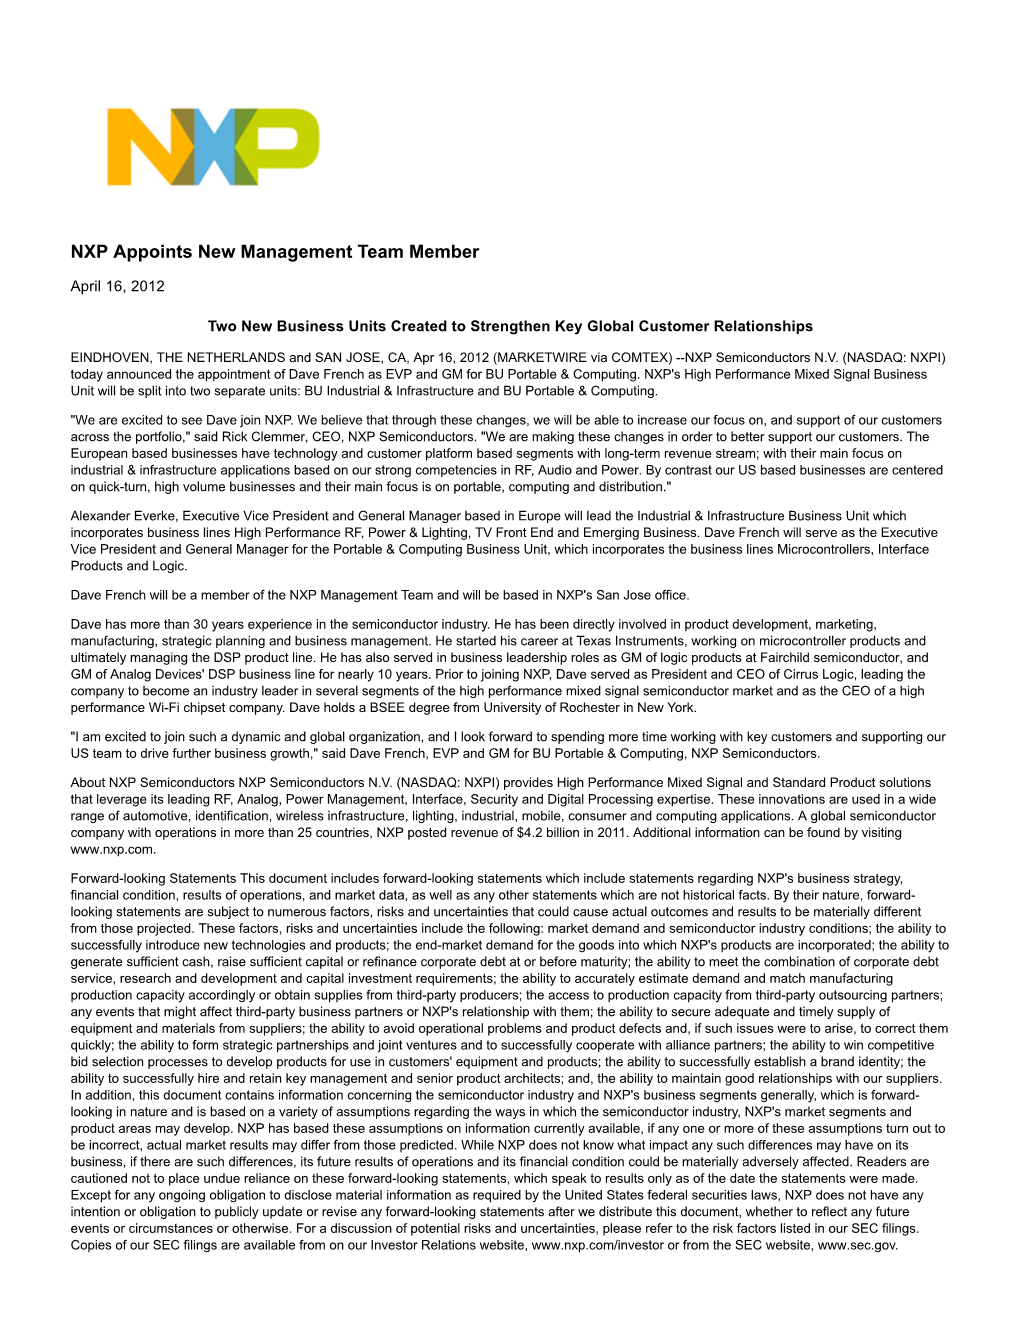 NXP Appoints New Management Team Member